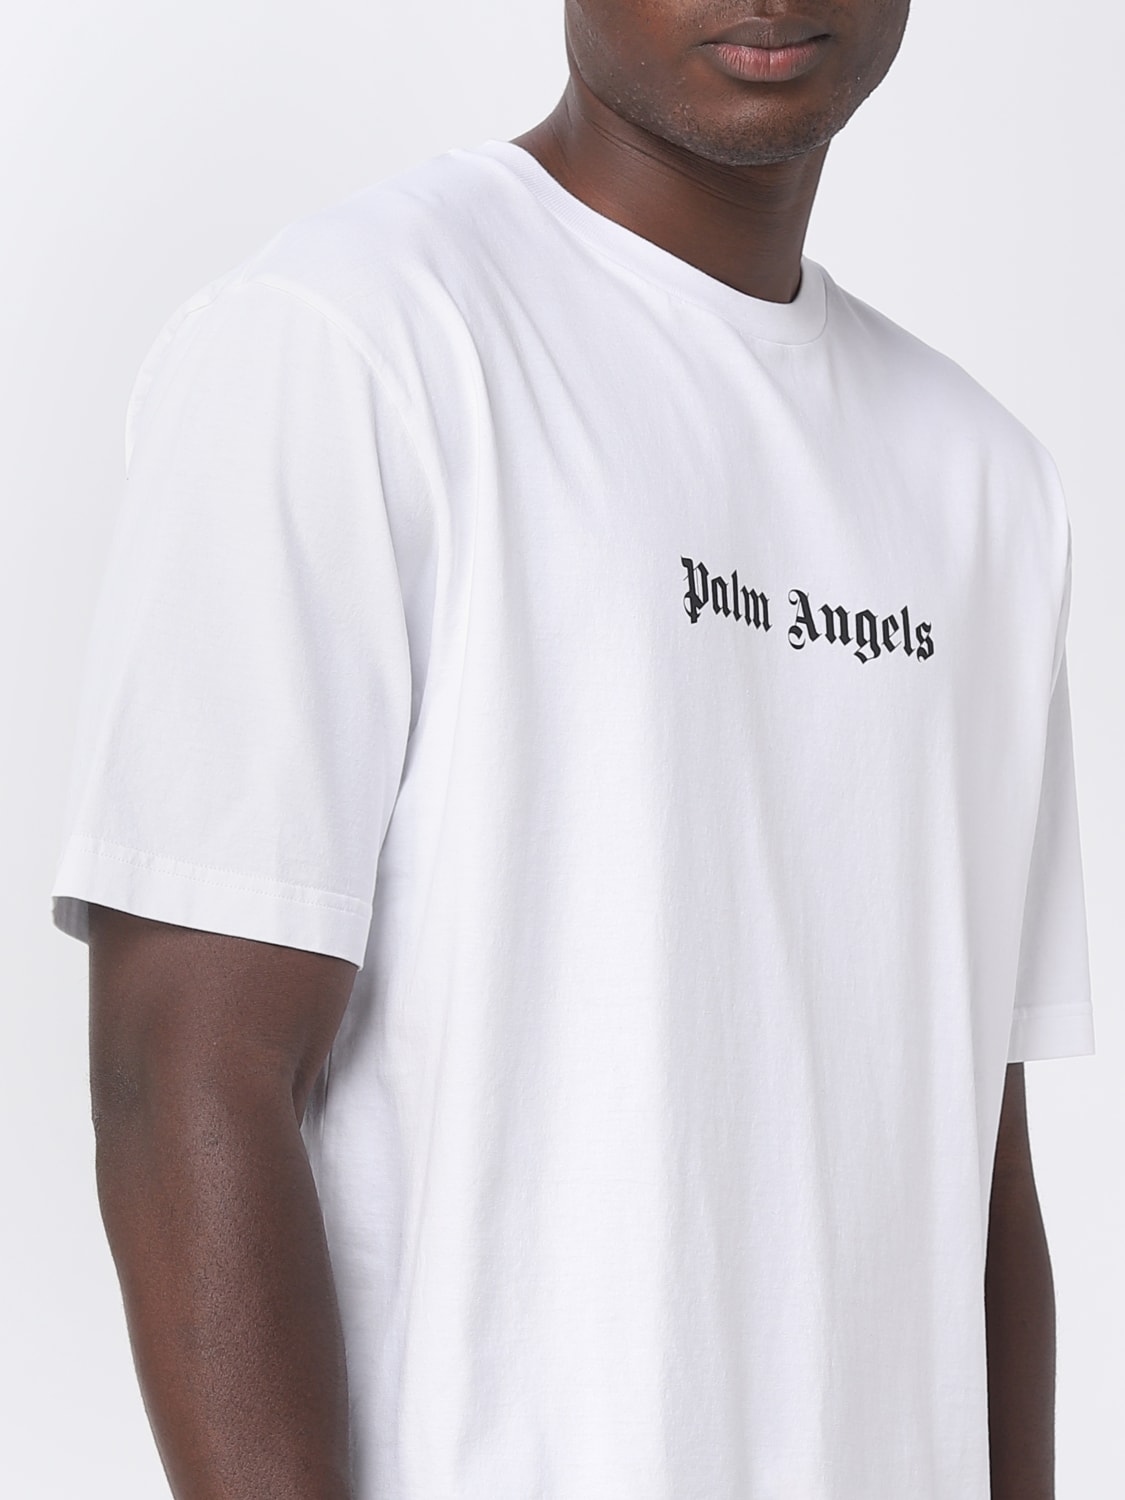 PALM ANGELS: cotton T-shirt with printed logo - White  PALM ANGELS t-shirt  PMAA089F23JER002 online at